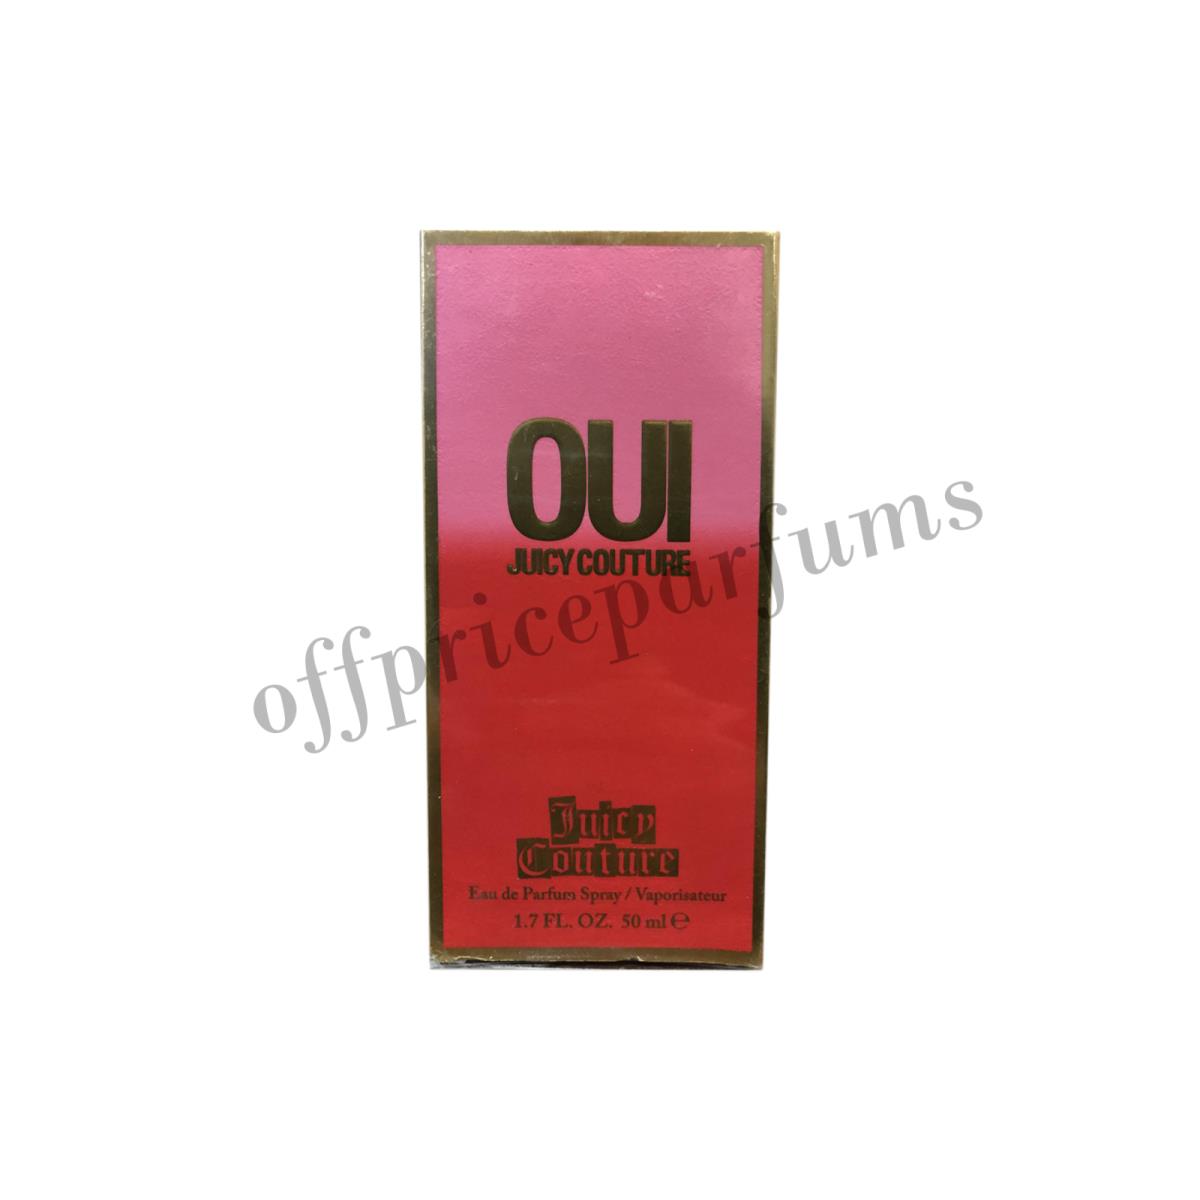 Juicy Couture Oui Perfume by Juicy Couture 1.7oz / 50 ml Edp Spray For Women